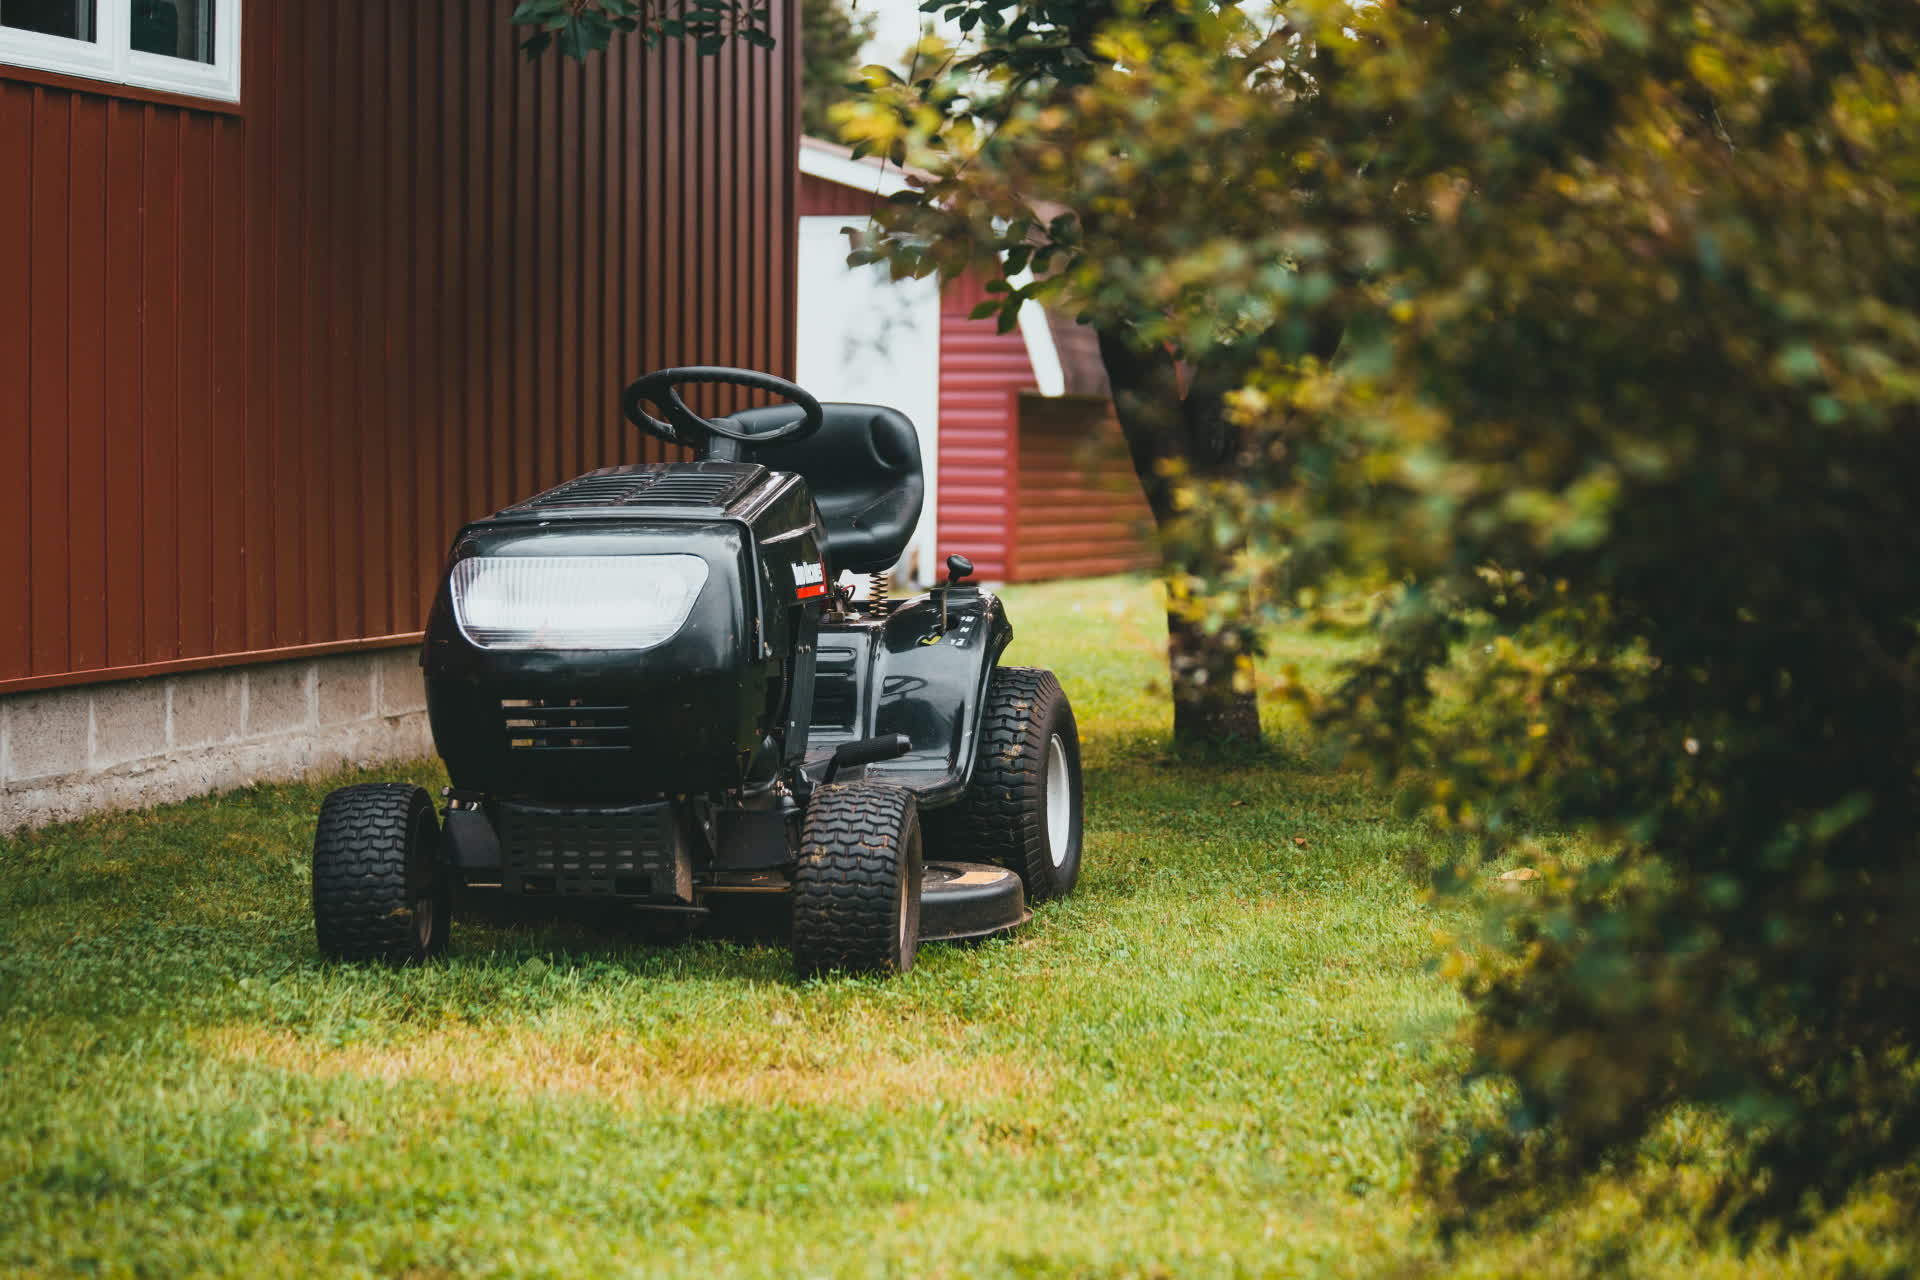 California bill may restrict the sale of gas-guzzling lawnmowers and generators in 2024